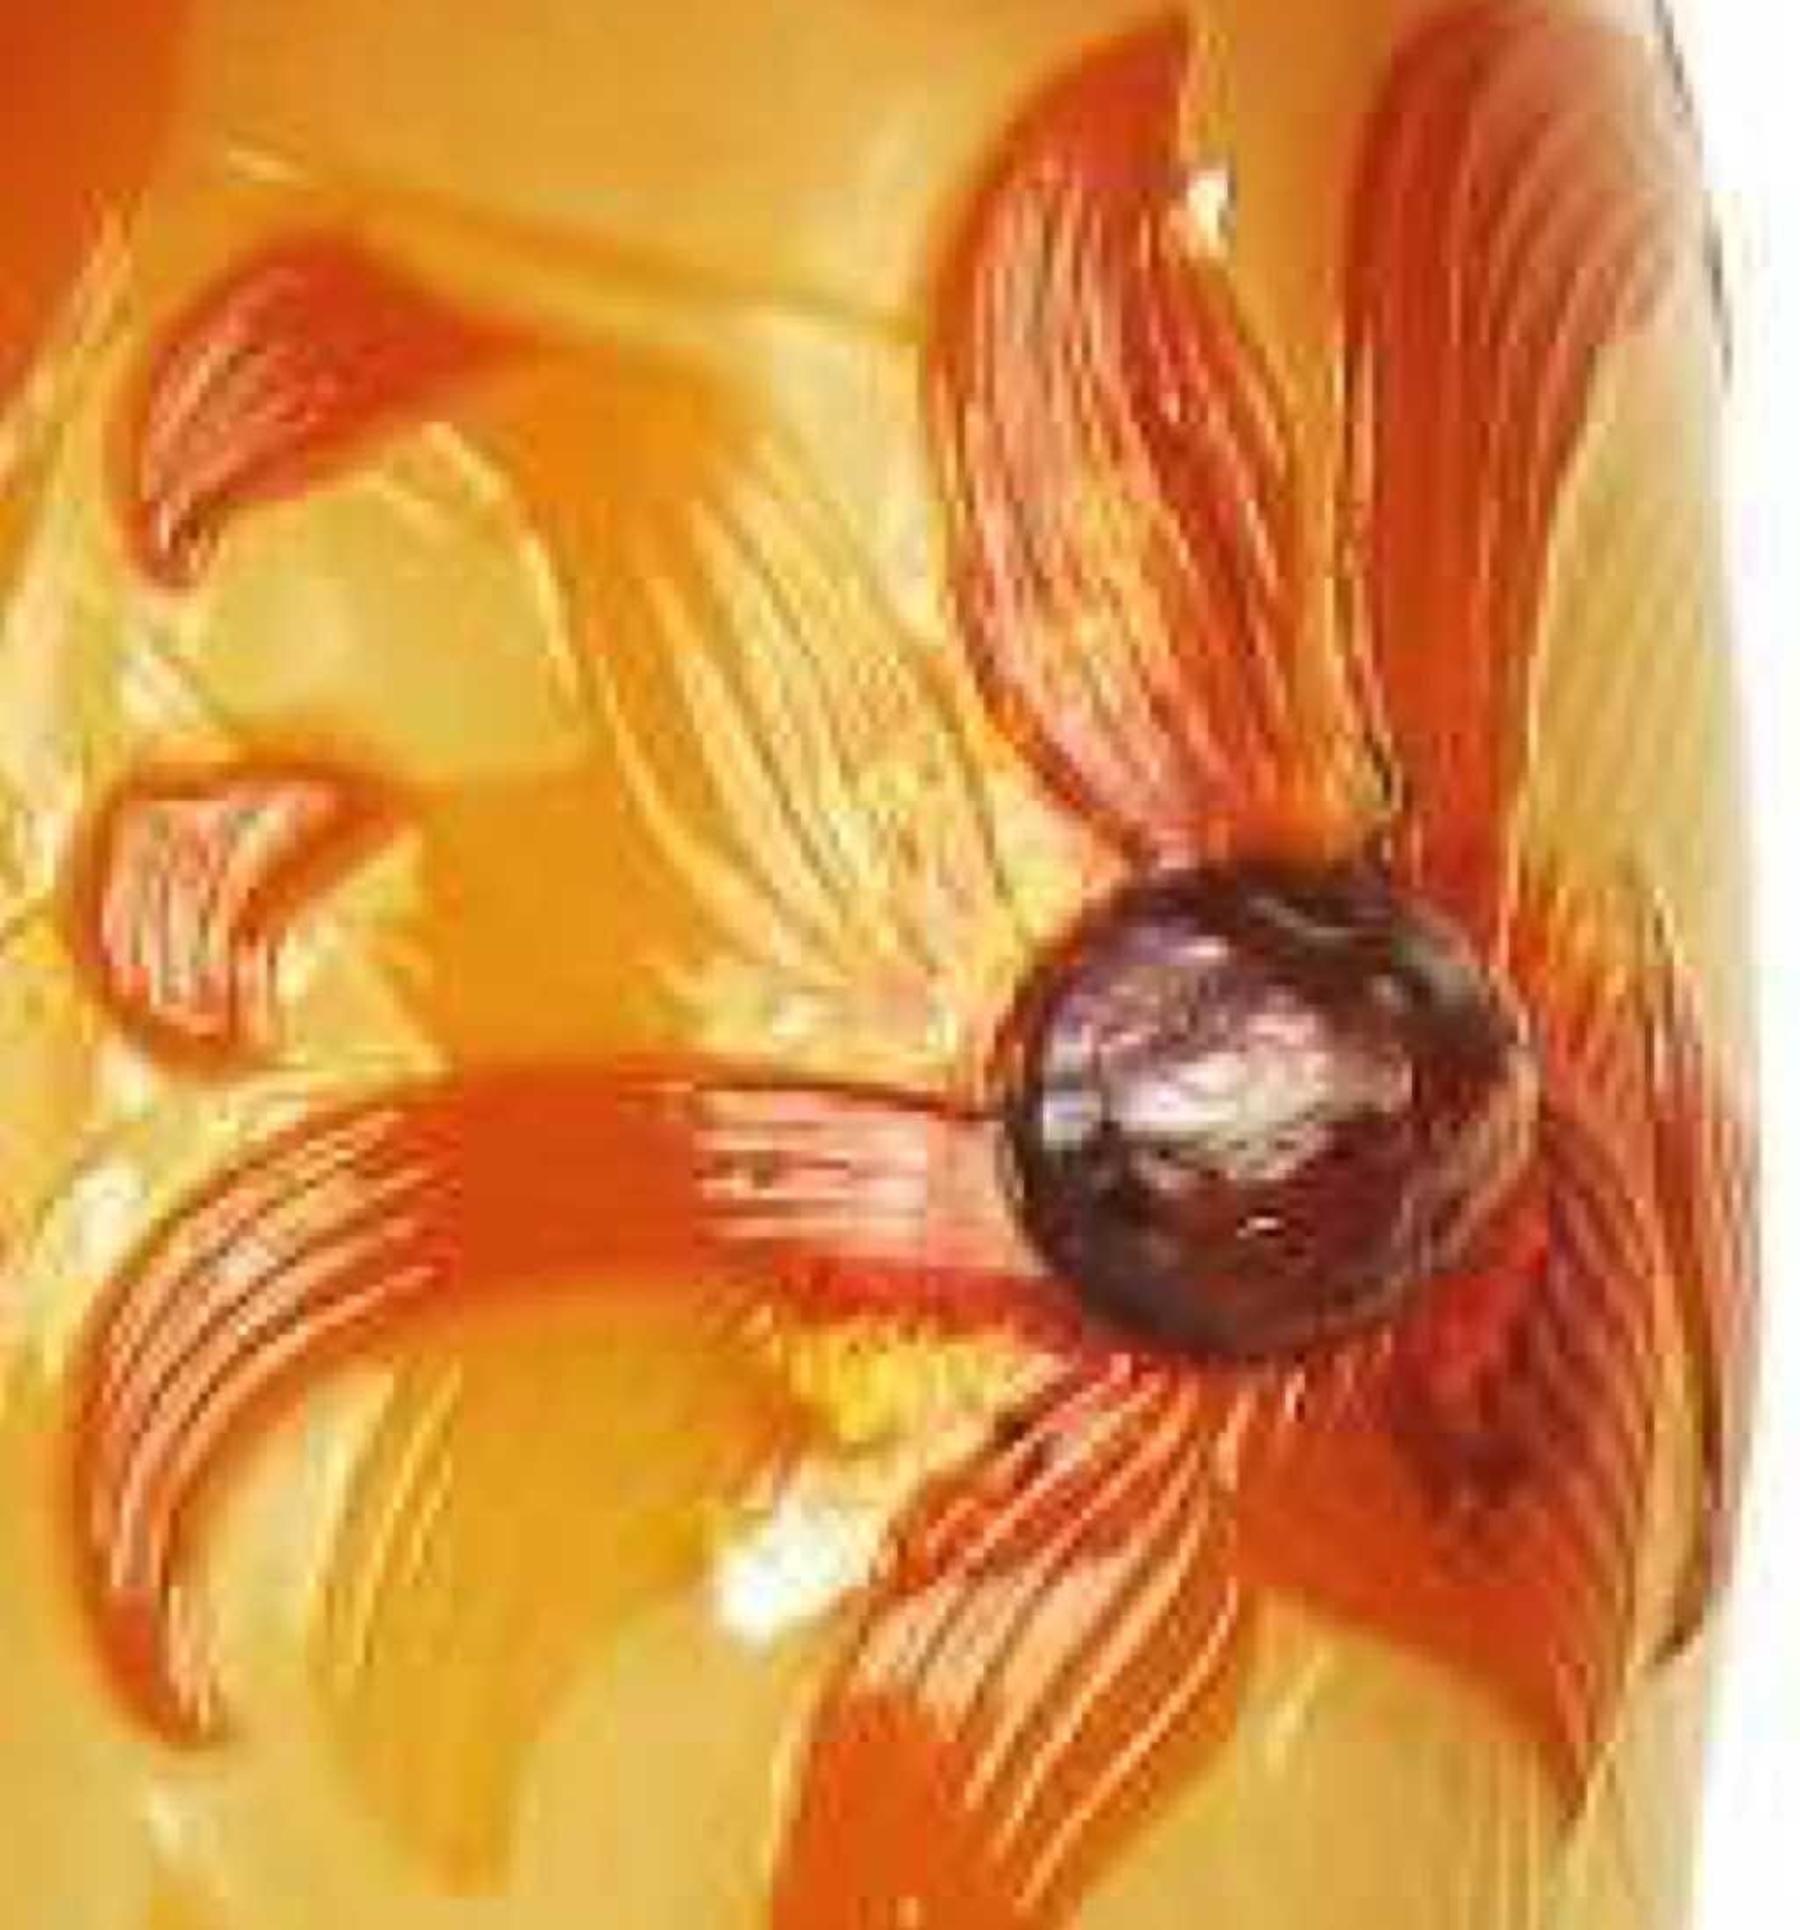 Emile Gallé, French (1846-1904)
A very fine internally decorated fire-polished cameo glass vase with applied decoration, 'Dahlia', circa 1900
13.25 in. (33.6 cm.) high
signed Gallé 

Emile Gallé was a master craftsman who skillfully interpreted